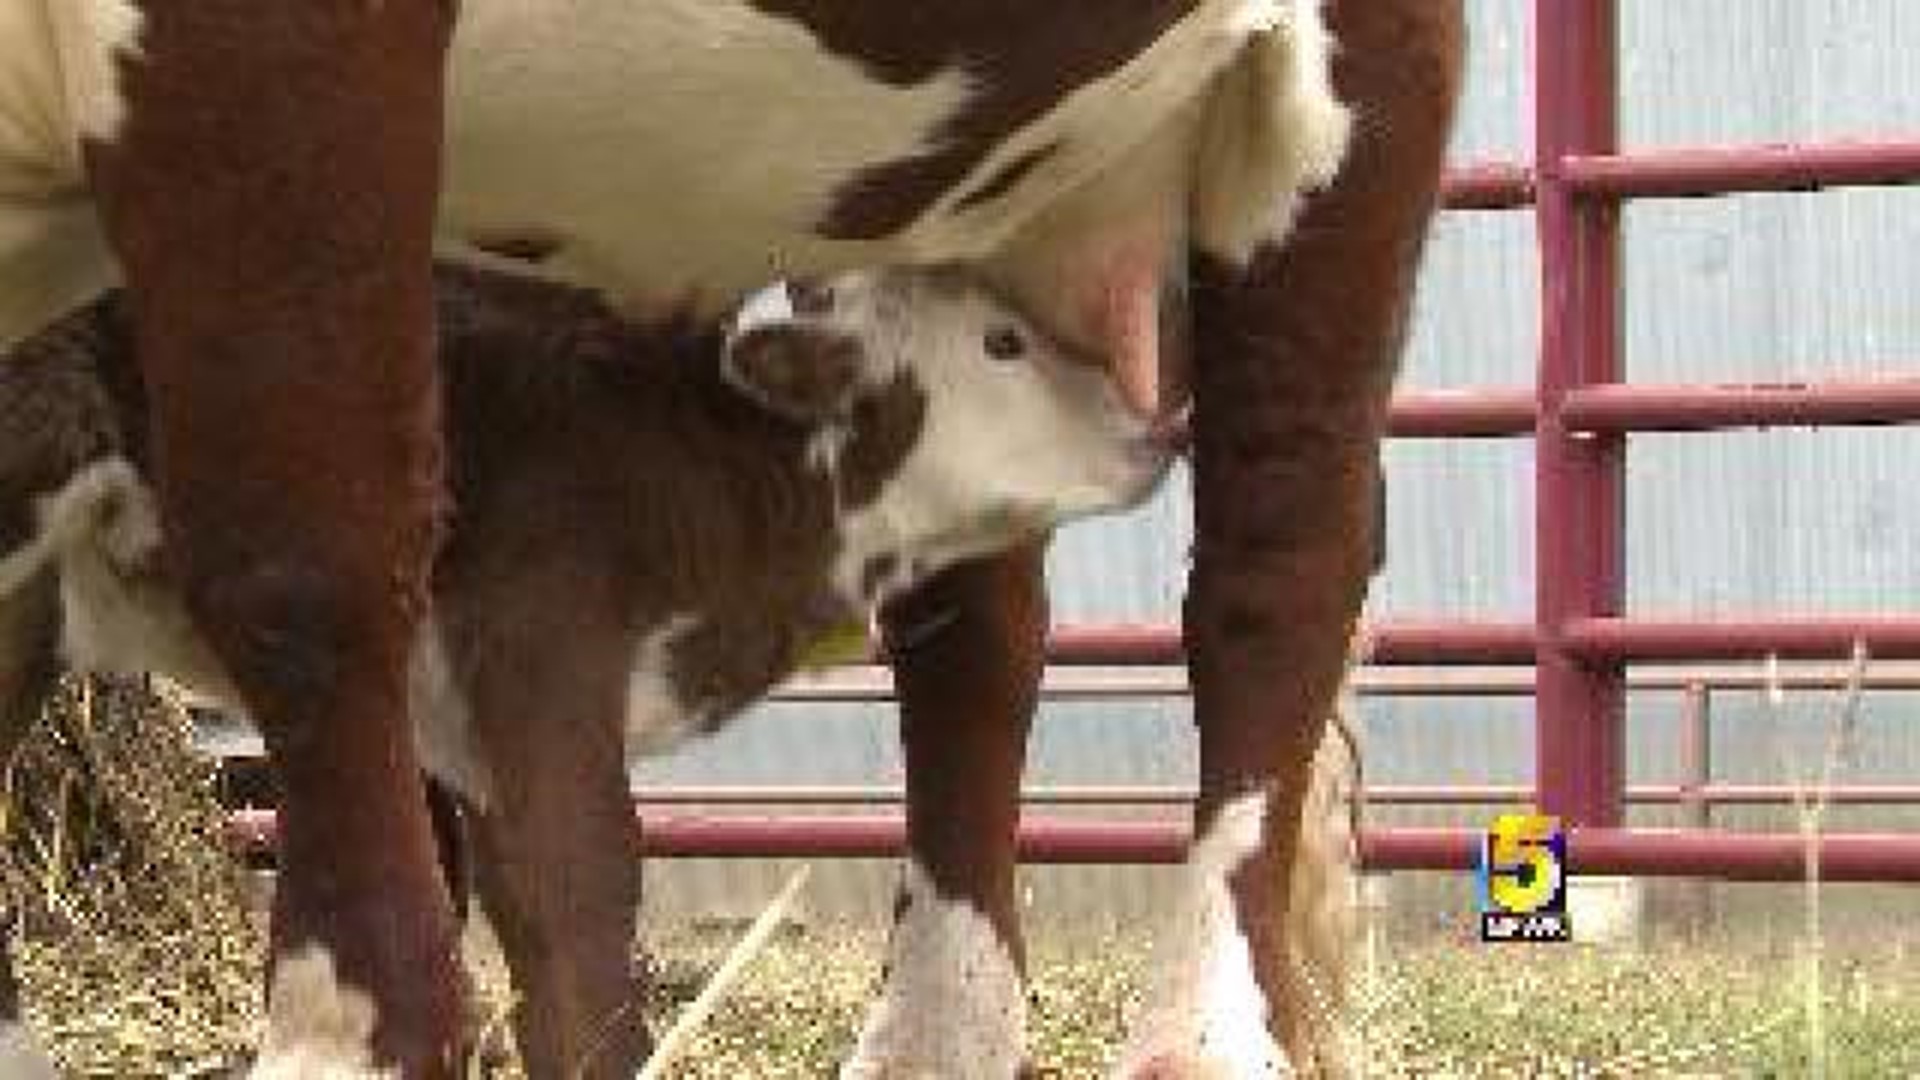 Cow Gives Birth To Several